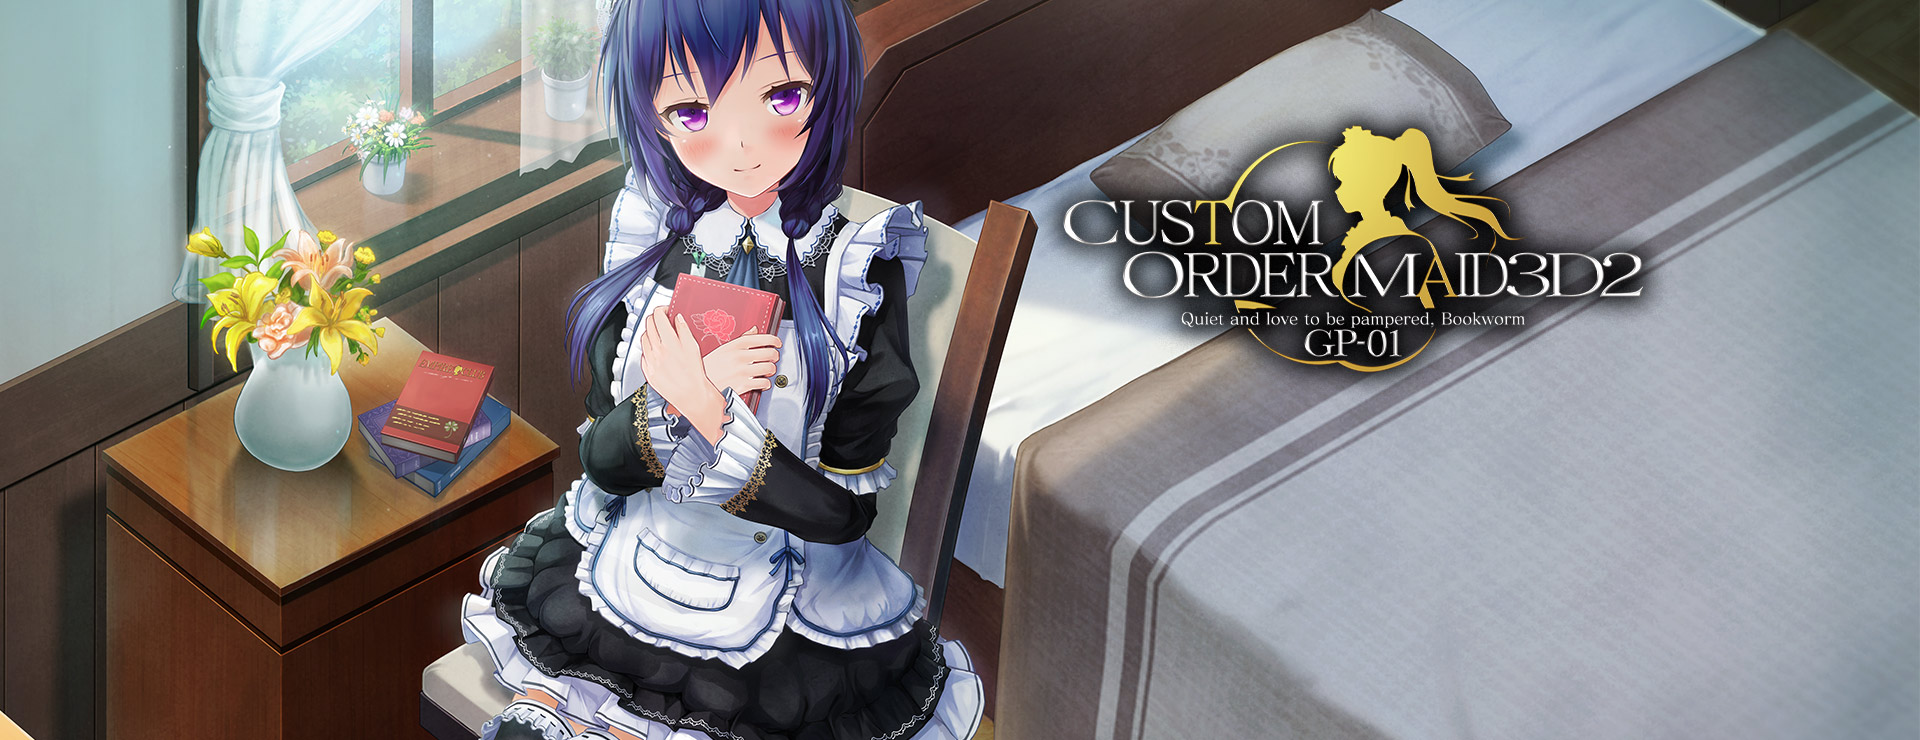 Custom Order Maid 3D2 - Quiet and love to be pampered Bookworm GP-01 DLC - 仿真游戏 遊戲